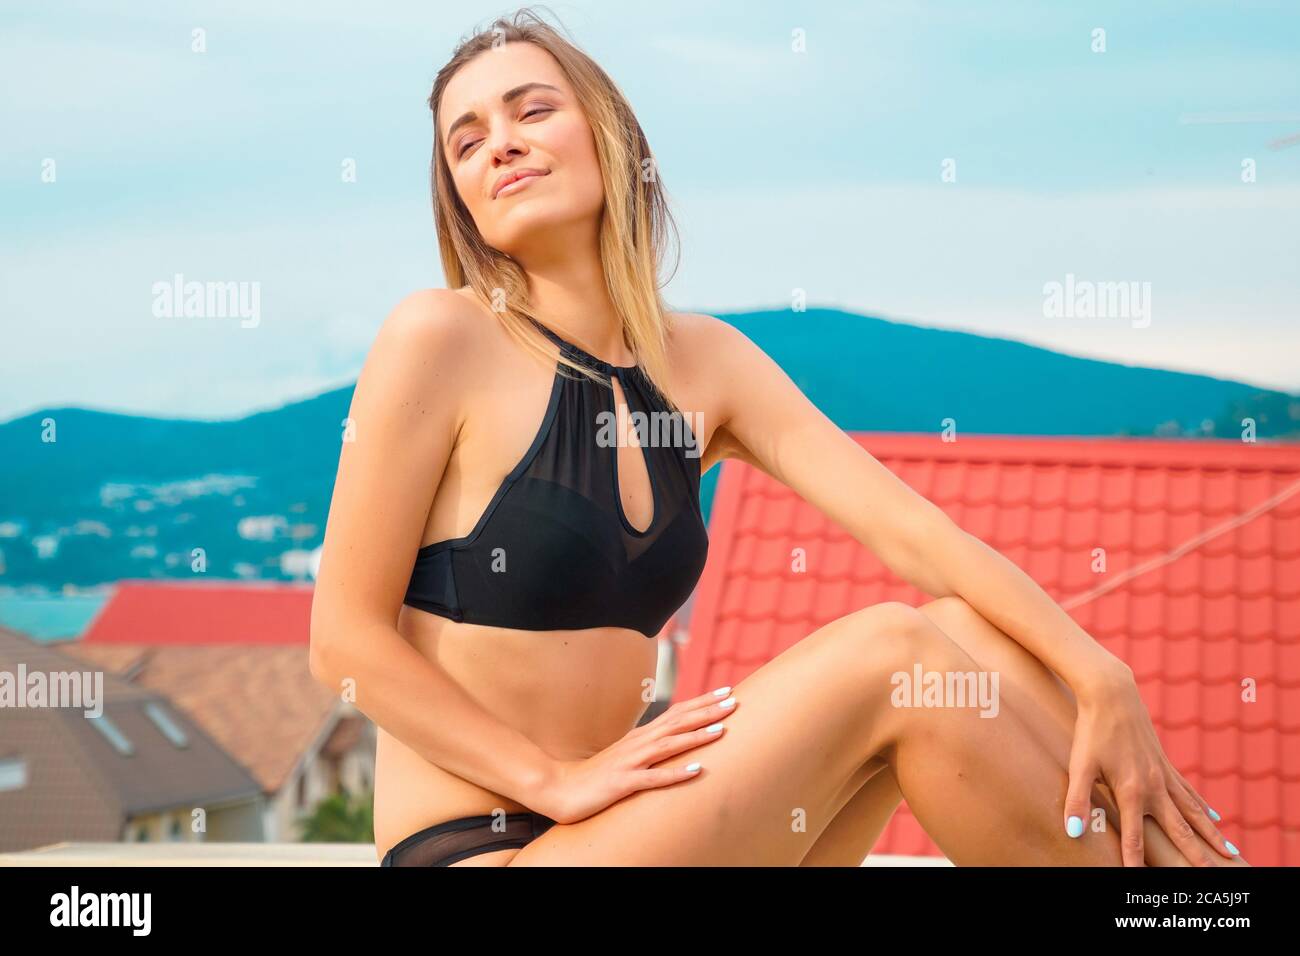 Beautiful tanned woman portrait at resort with beautiful view Stock Photo